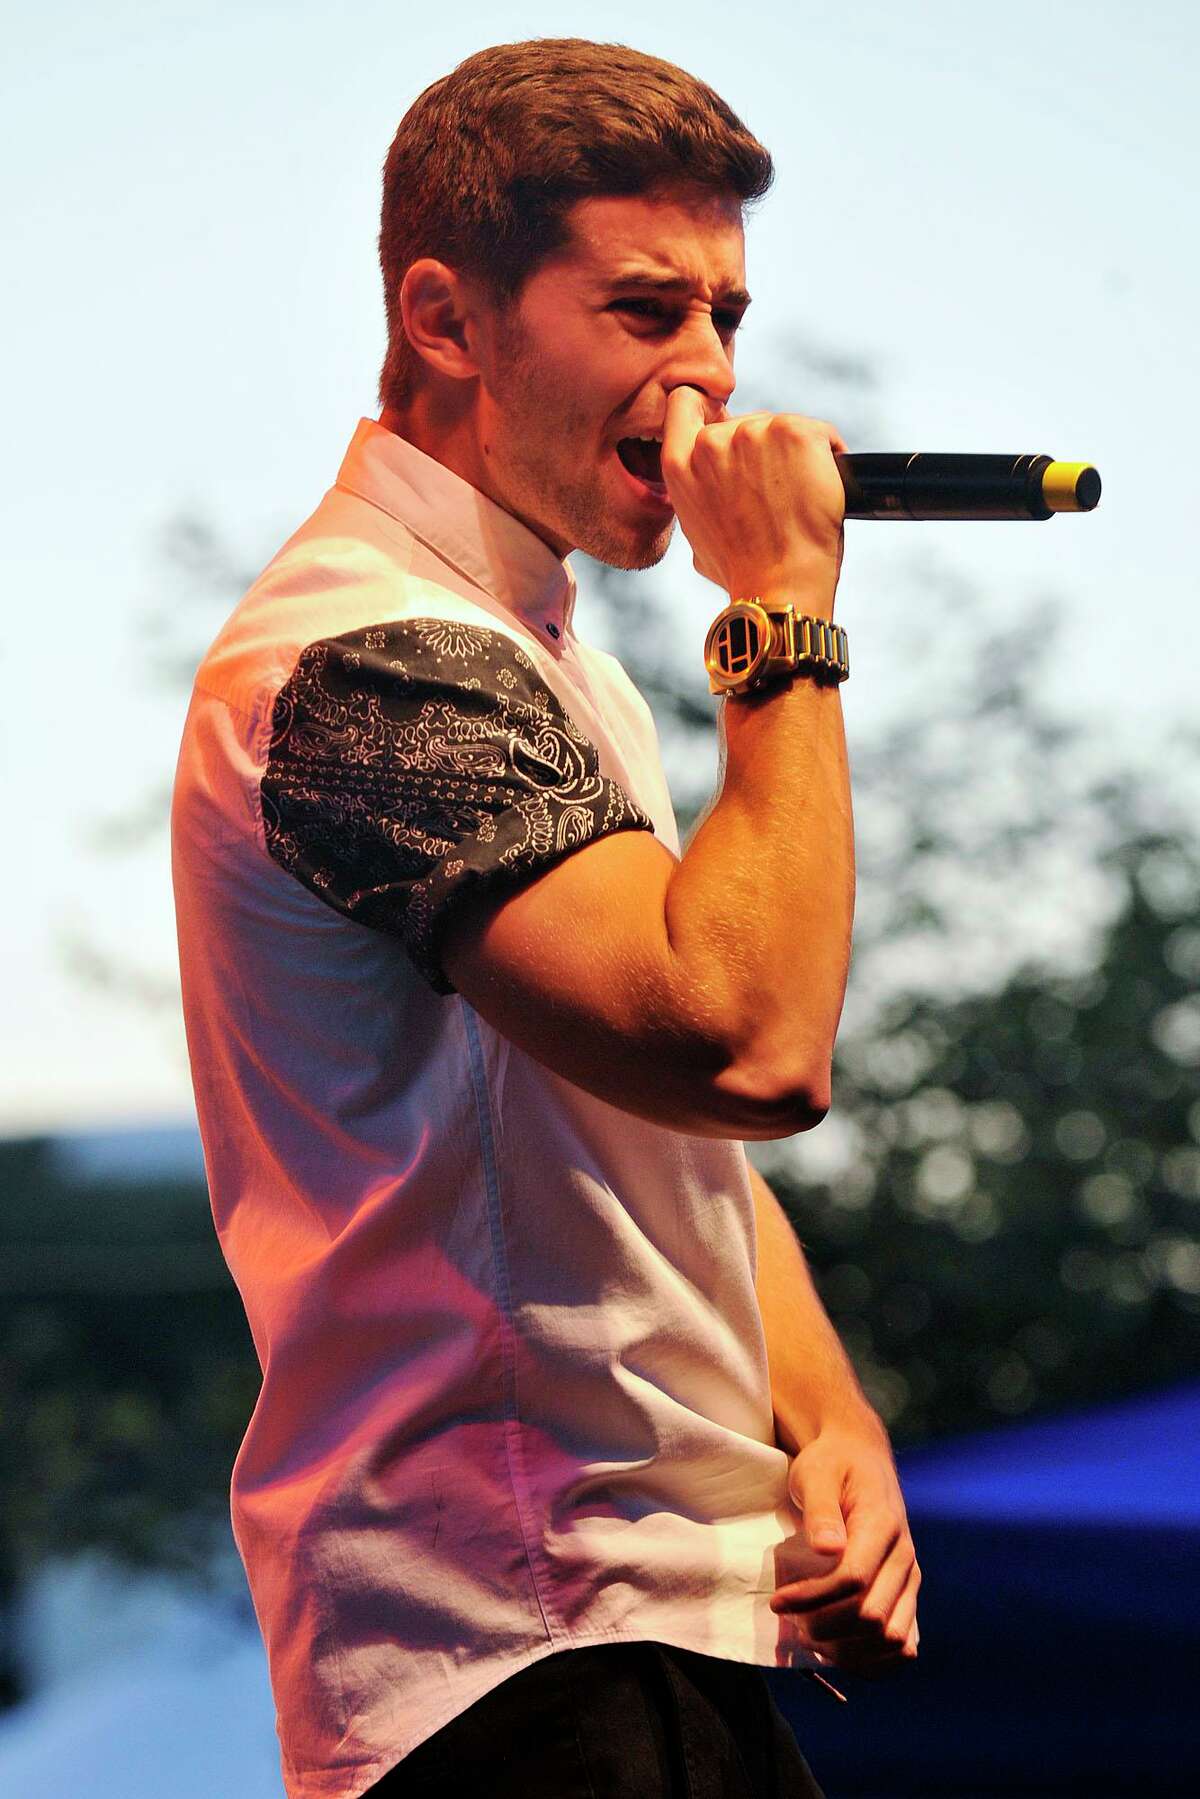 Jake Miller performs during Alive@Five at Columbus Park in Stamford, Conn., on Thursday, Aug. 7, 2014.